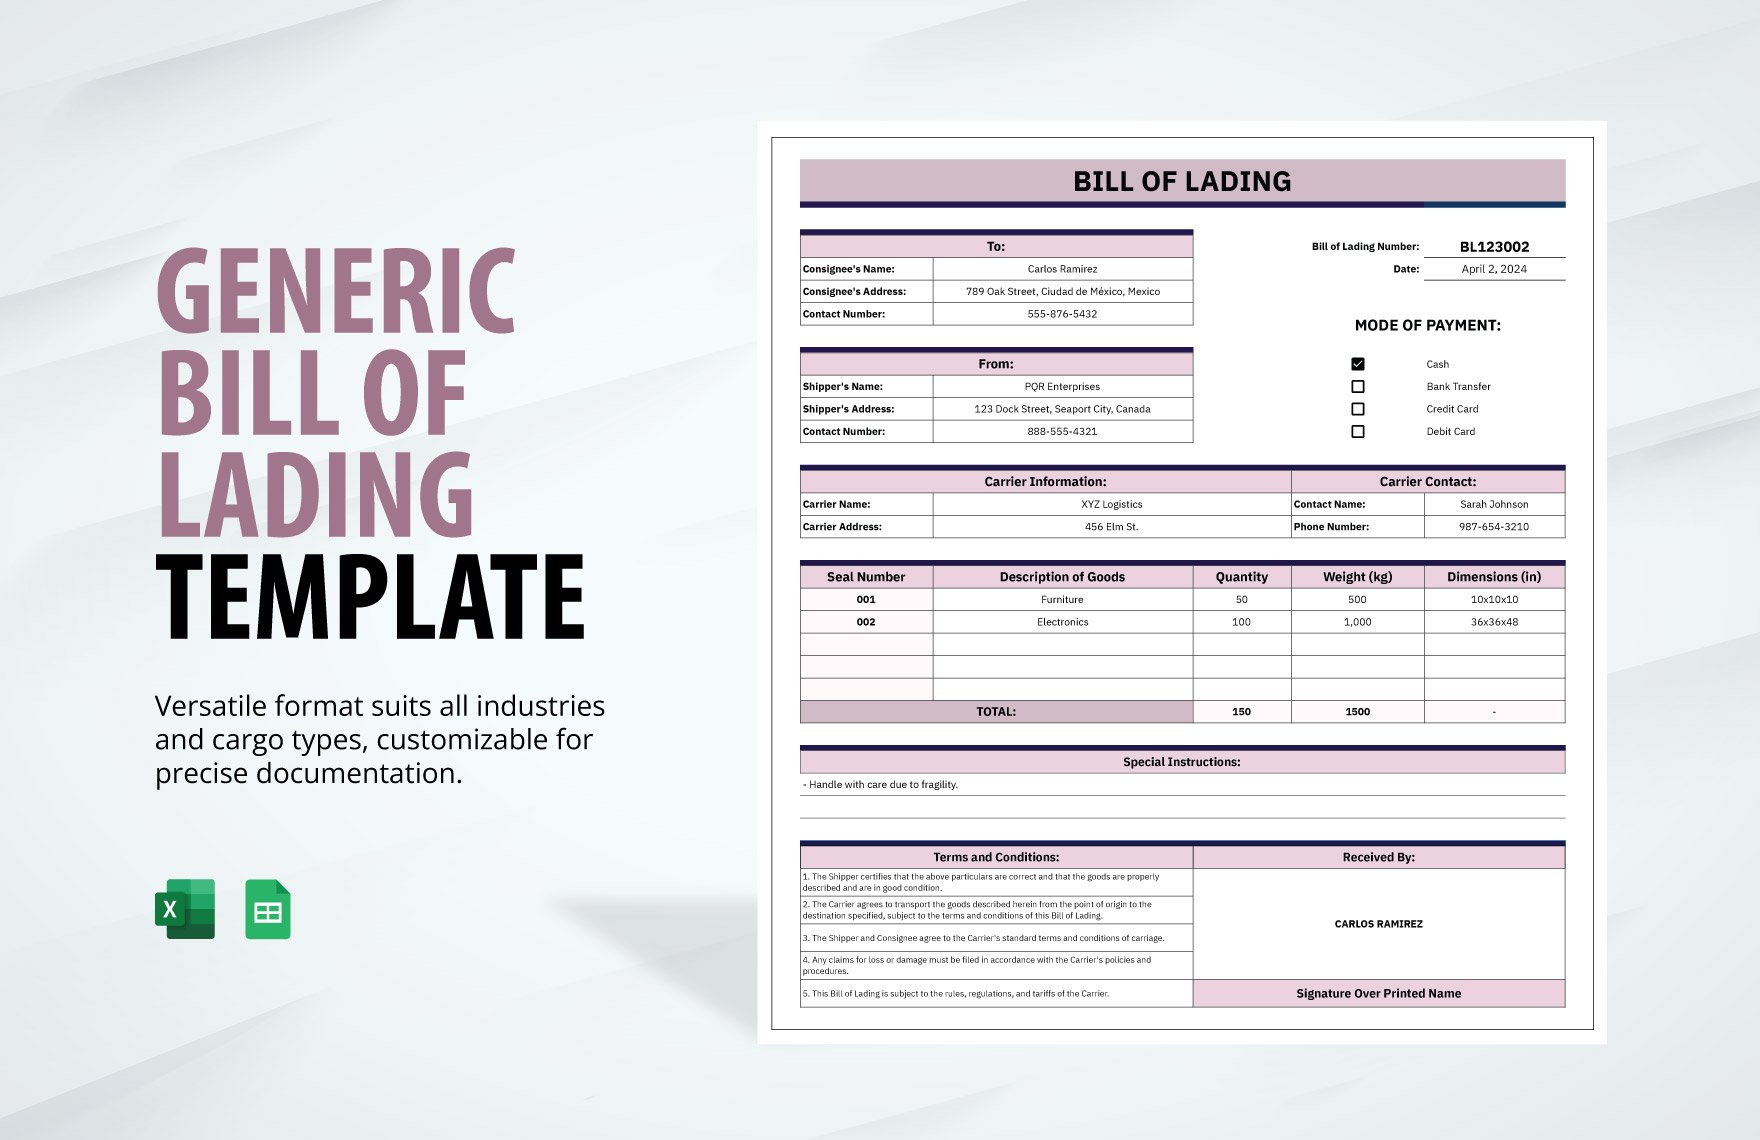 Generic Bill of Lading Template in Excel, Google Sheets